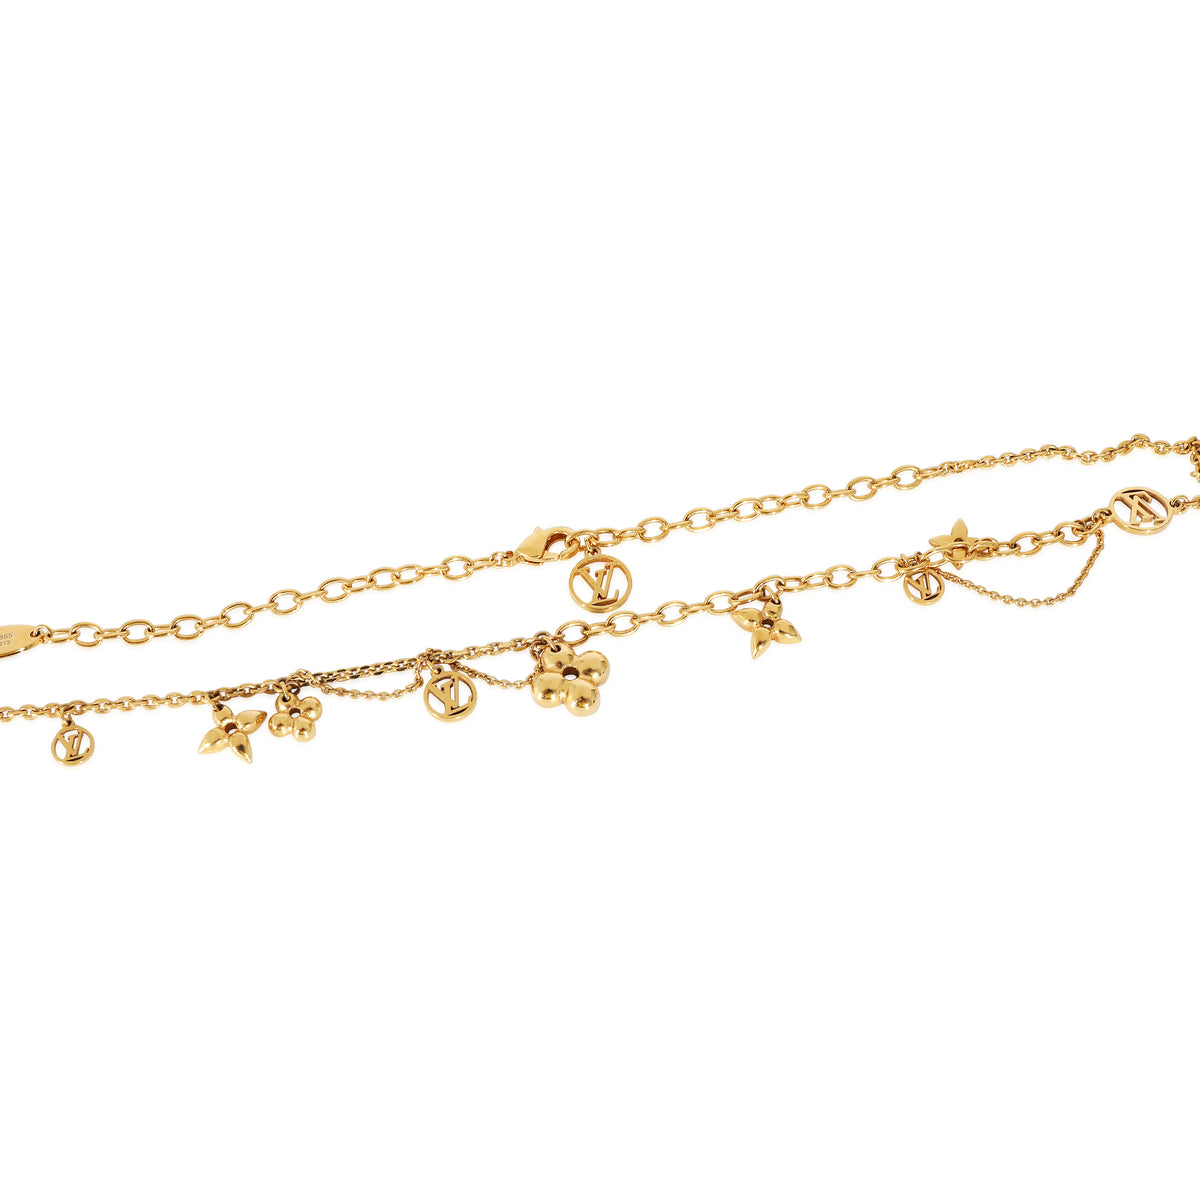 Louis Vuitton Blooming Bracelet in Gold Tone Strass, myGemma